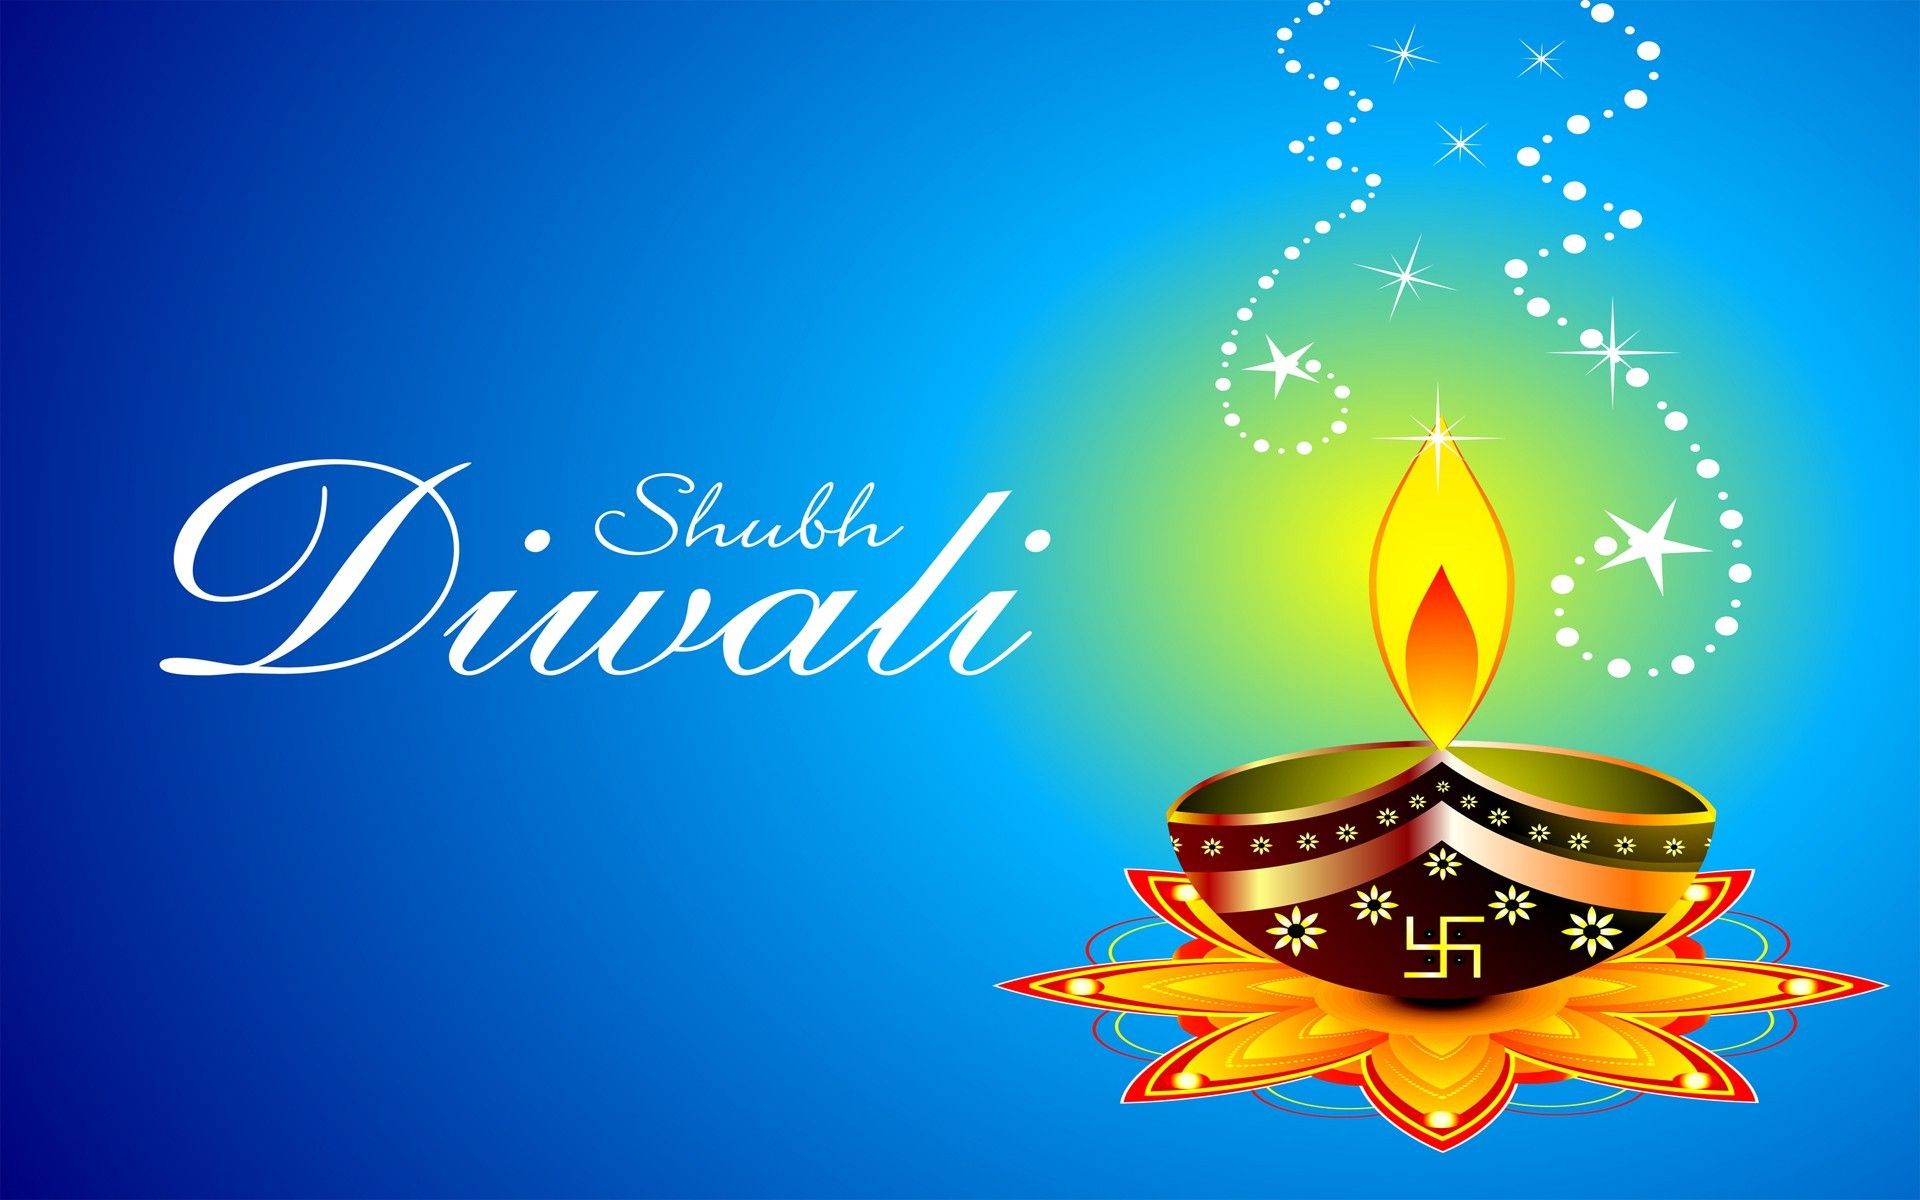 Diwali Wallpapers | Free Download HD Latest Indian Celebration Images